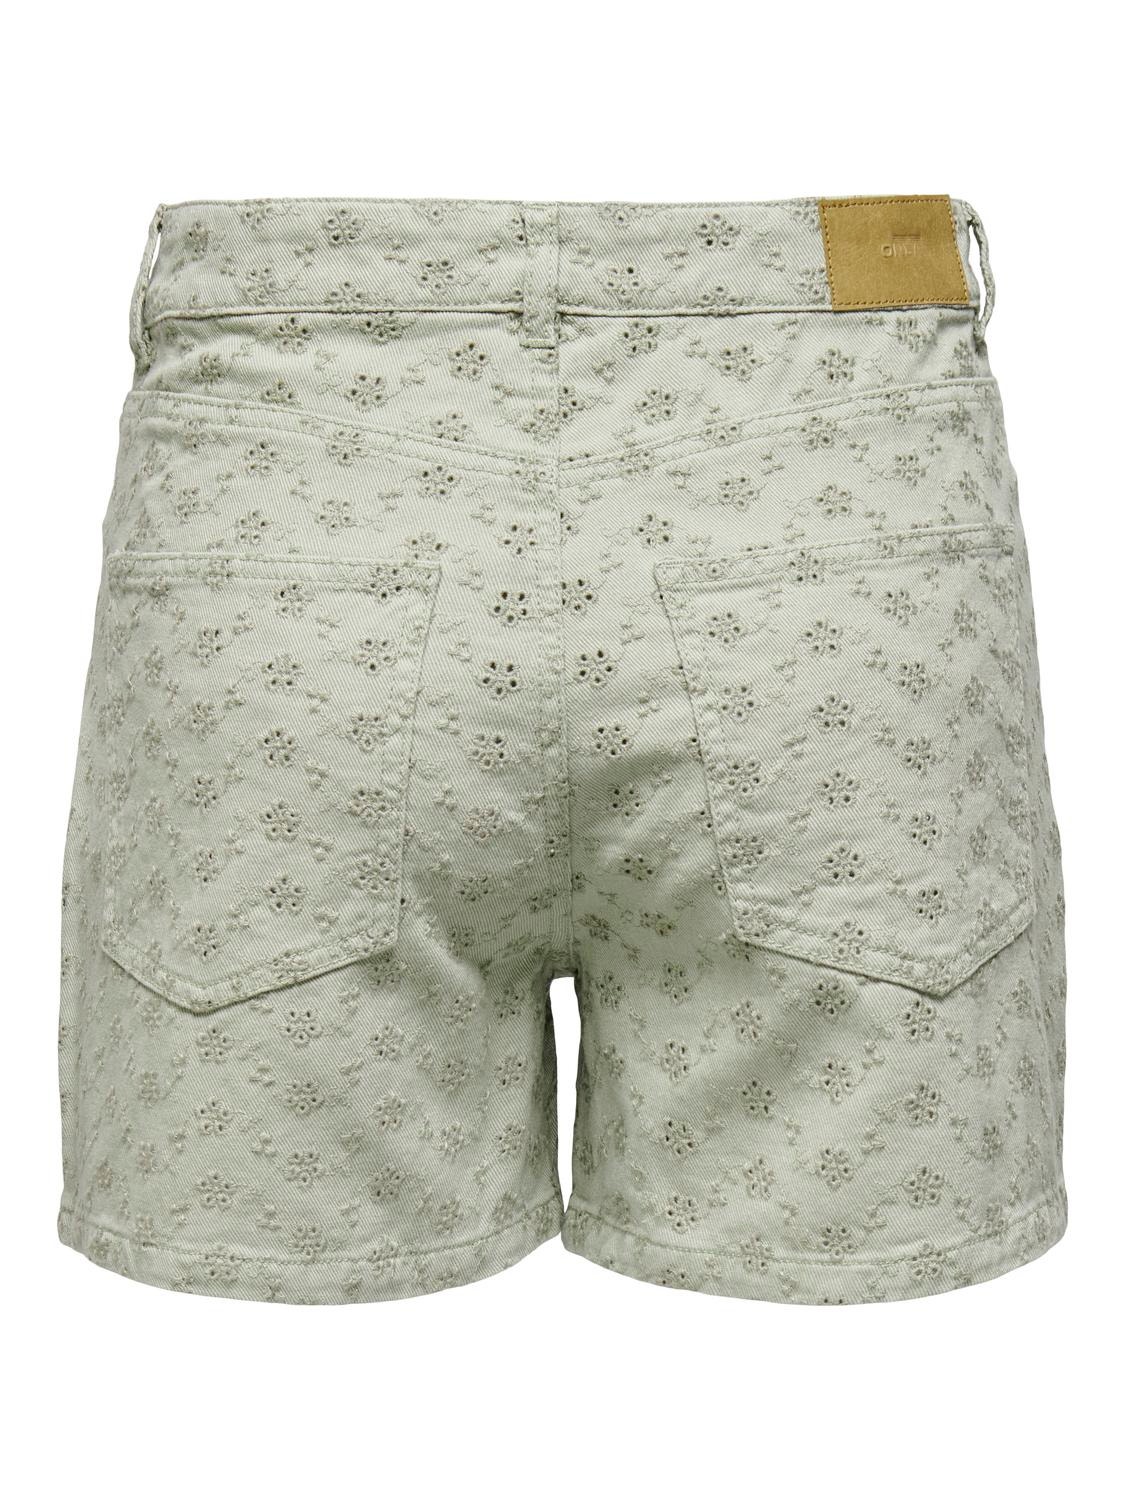 ONLY Patterned High waisted Shorts -Moss Gray - 15291508